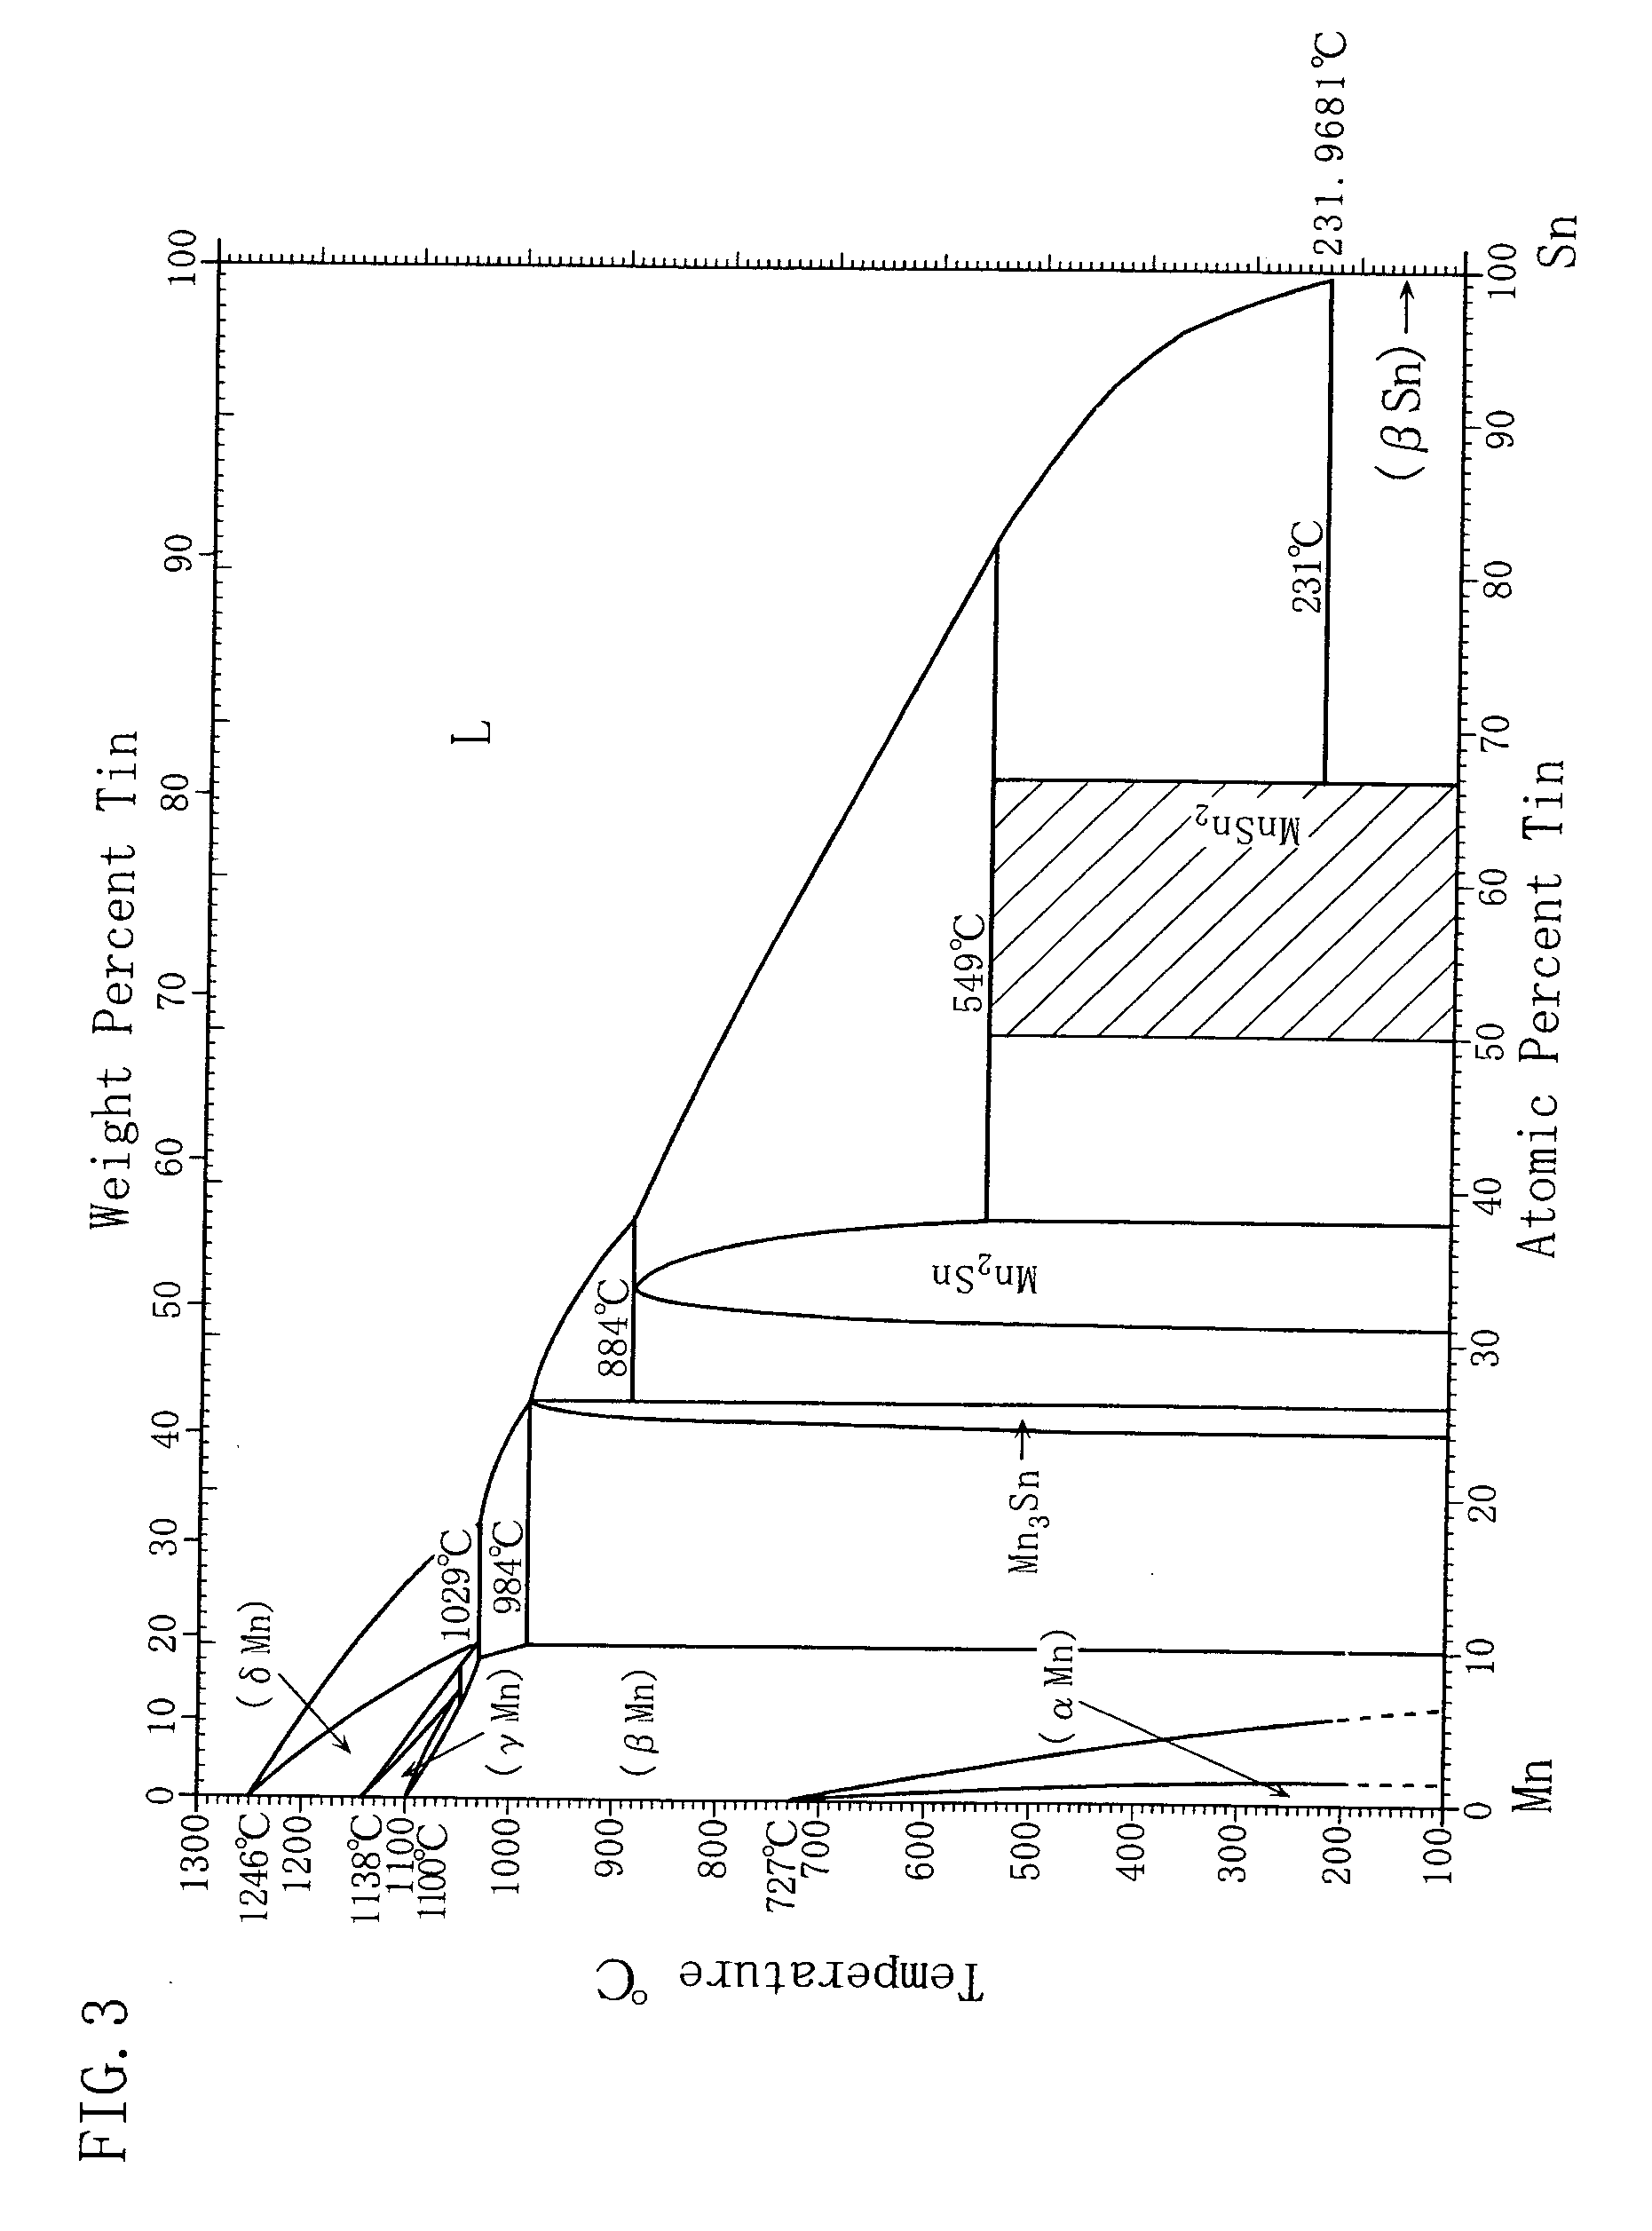 Lithium secondary battery, negative electrode therefor, and method of their manufacture